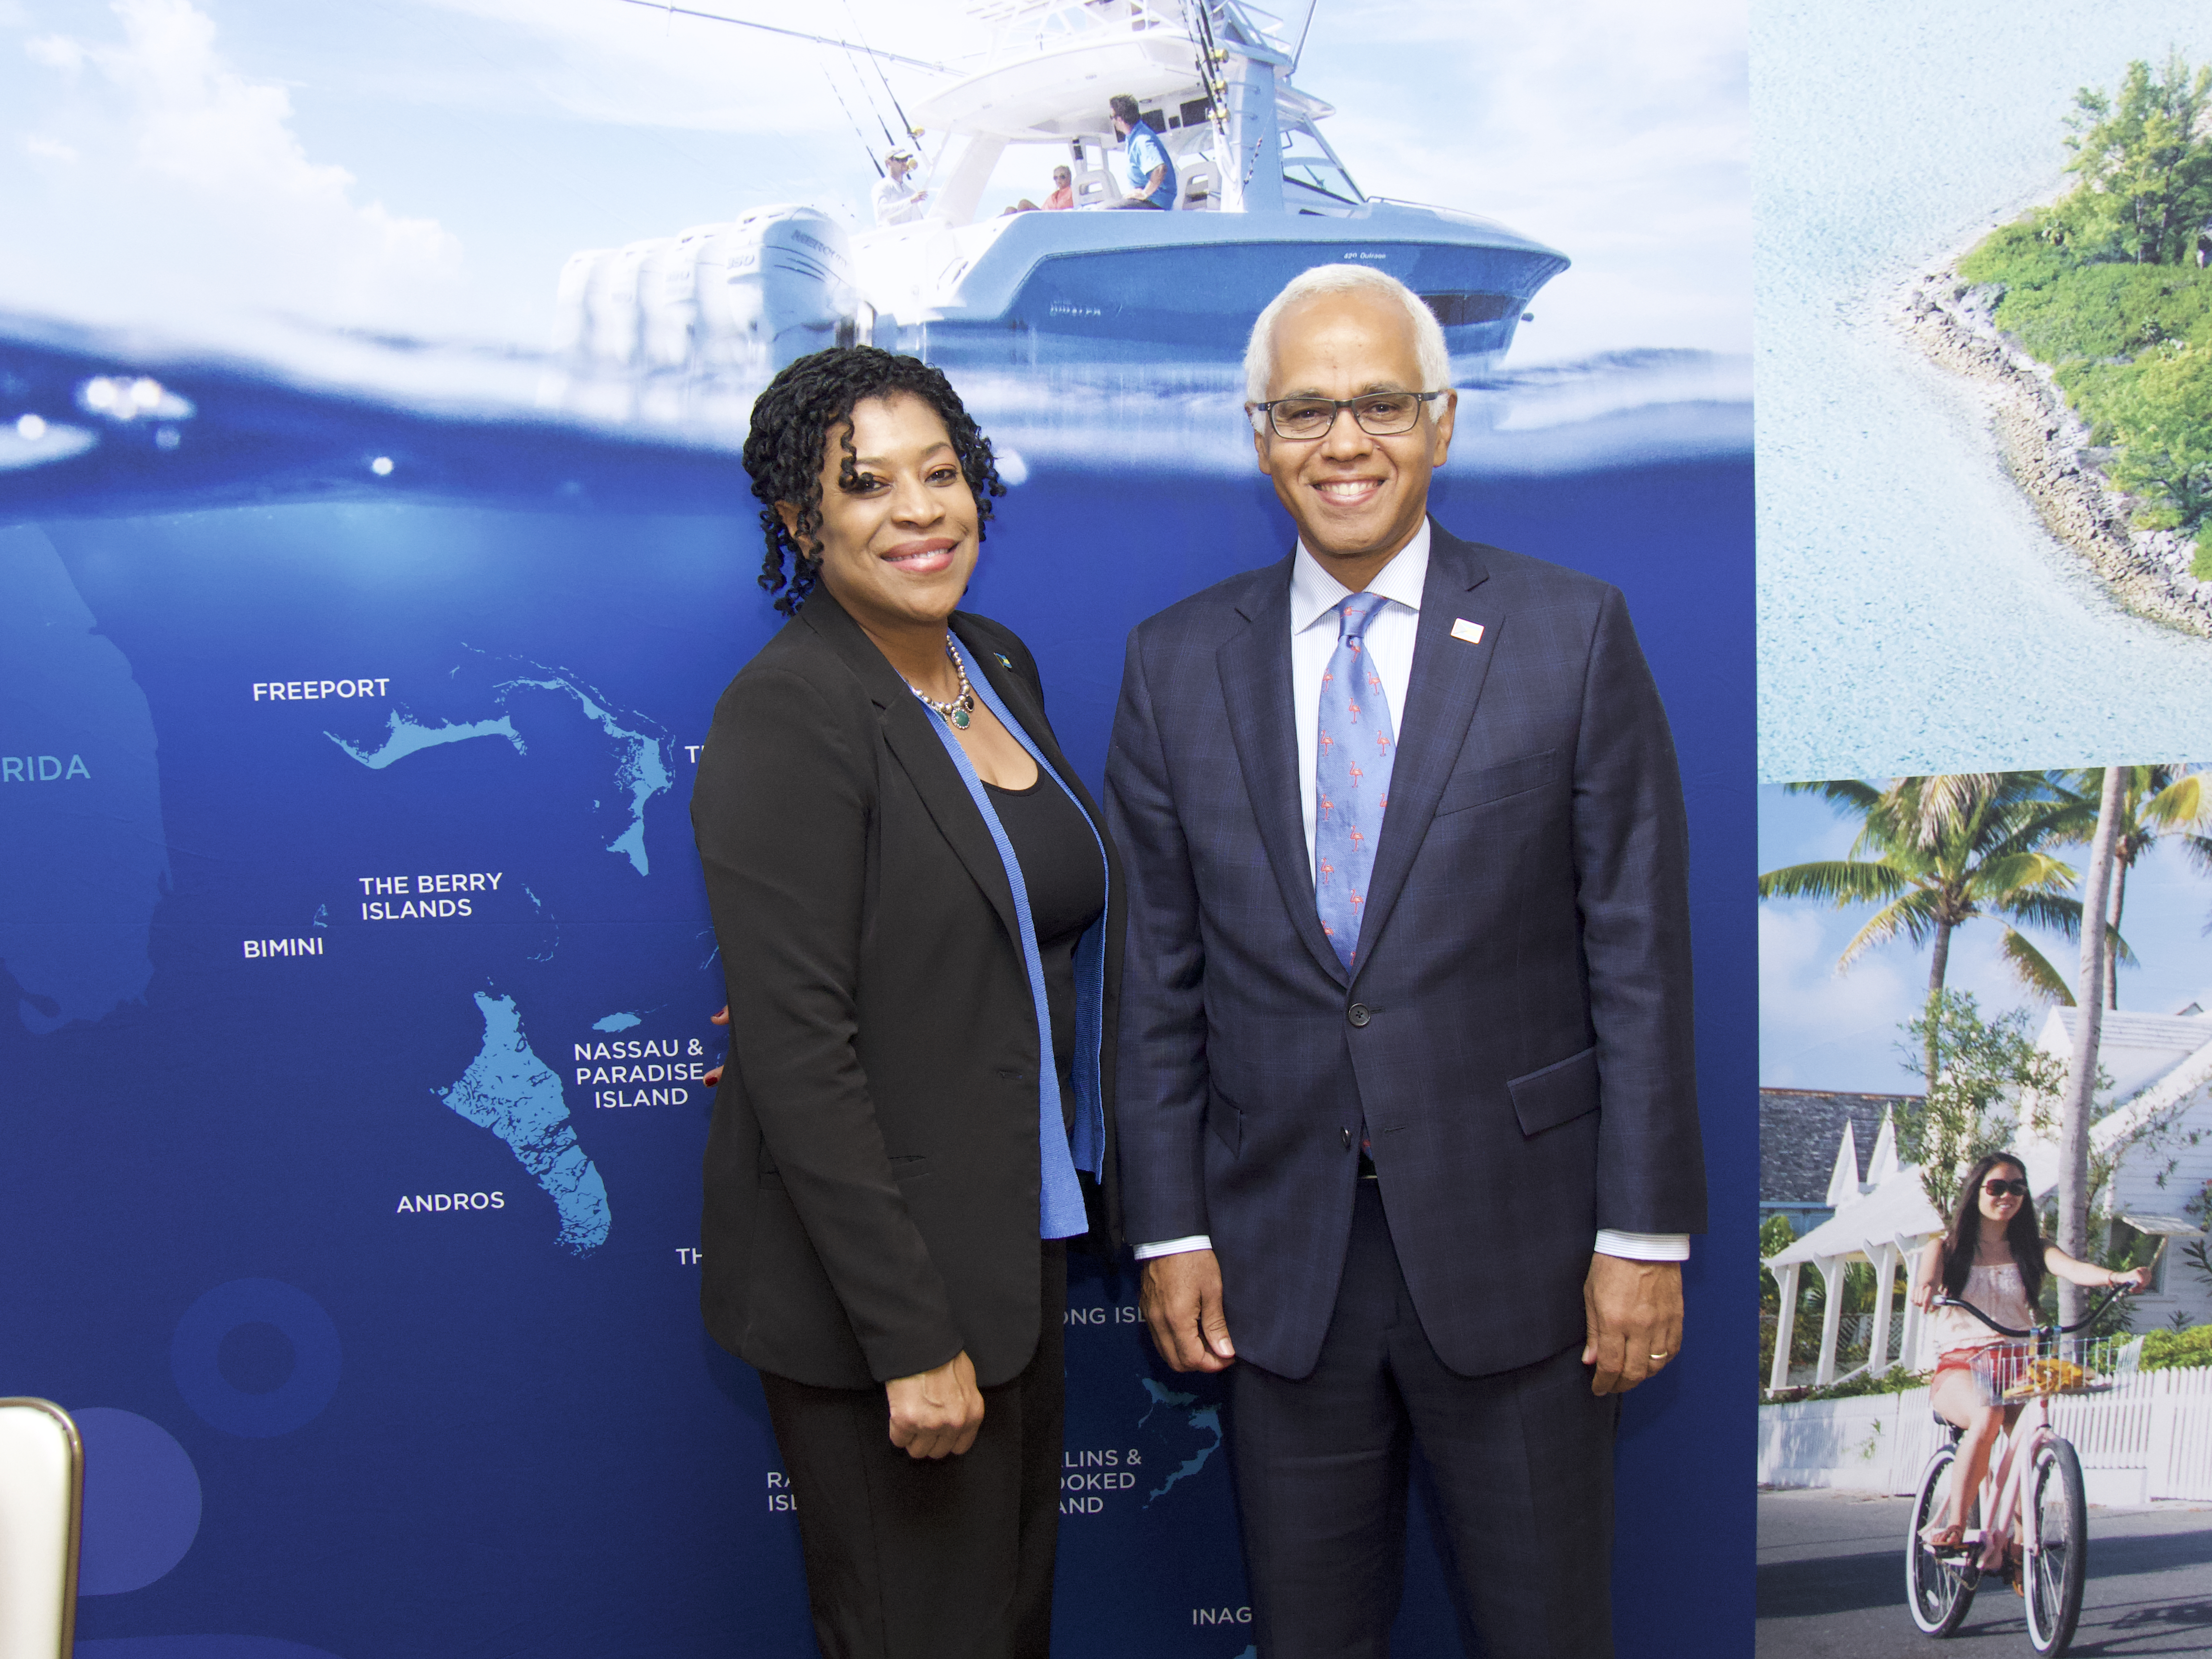 Charnelle Brown, Deputy High Commissioner along with Bahamas Minister of Tourism, Hon. Dionisio D’Aguilar at Vancouver Media event